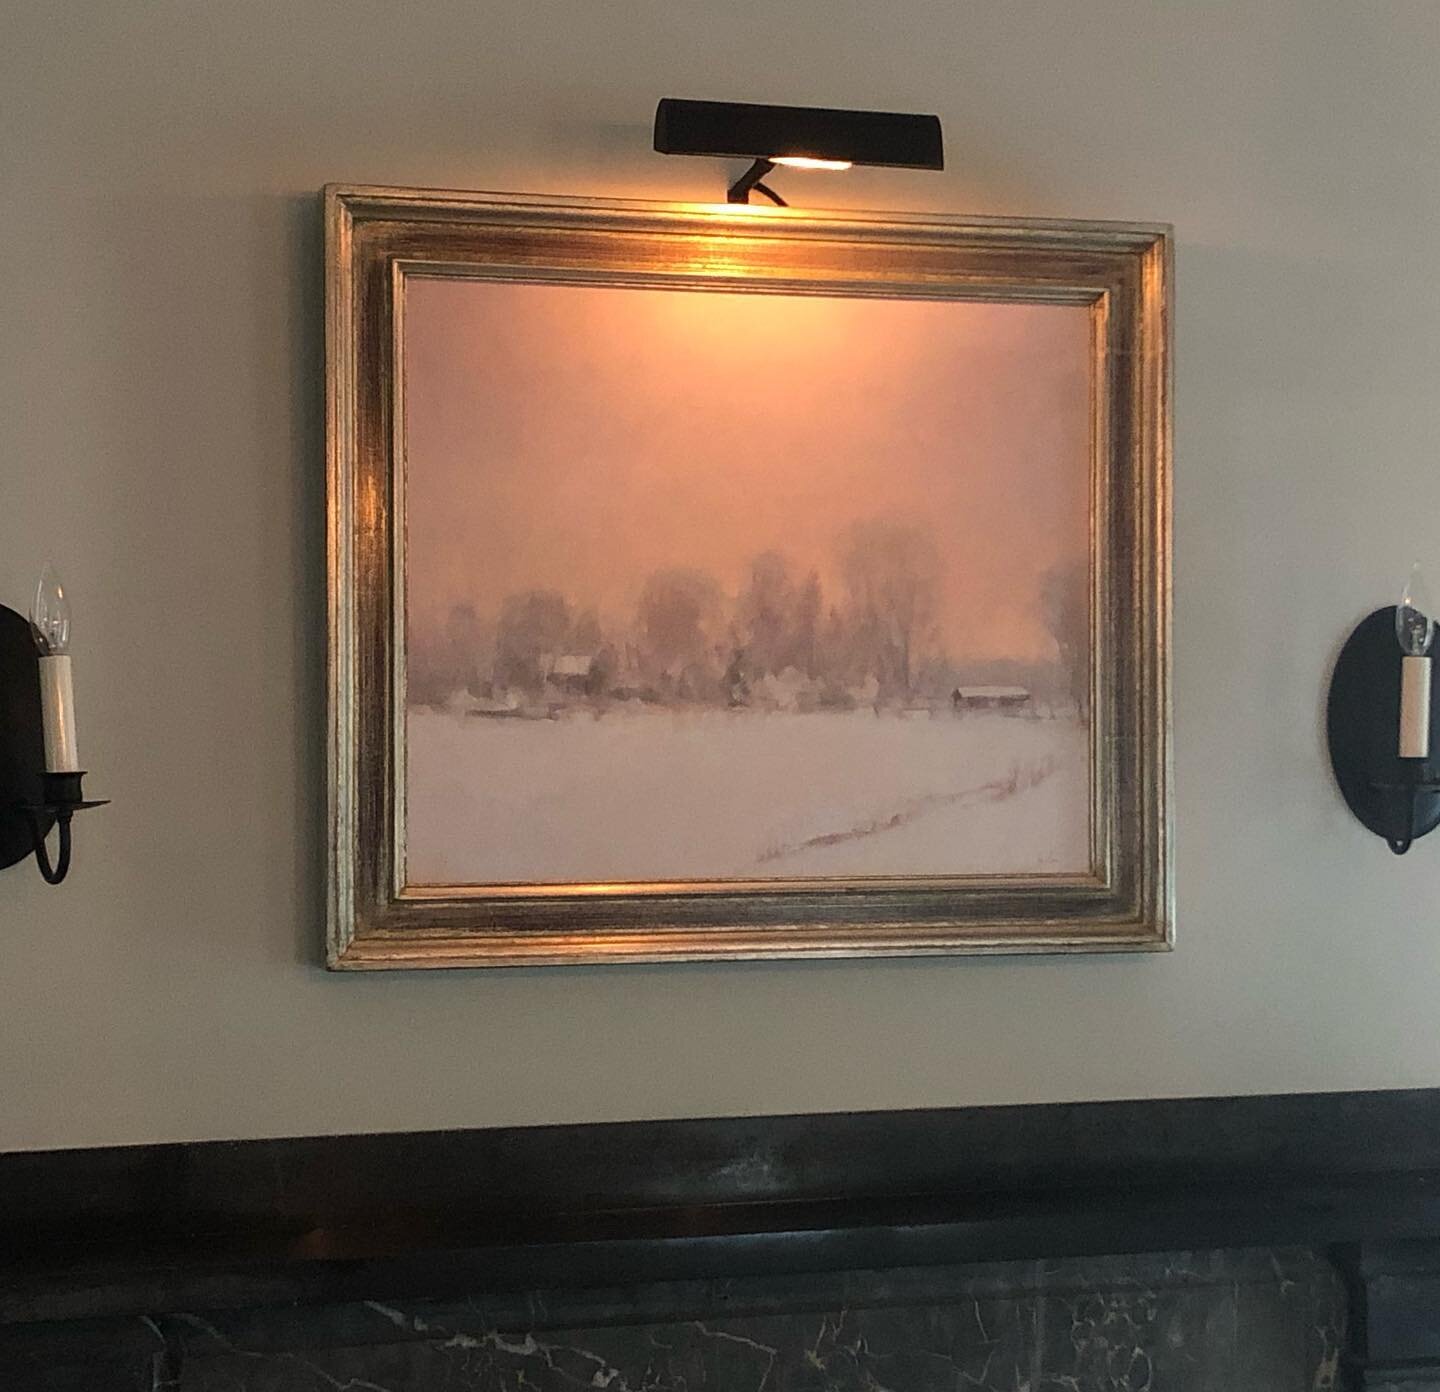 Happy clients absolutely make my day! This James Coe painting entitled &ldquo;Winter Poem&rdquo; was commissioned by a client here in Newport who loves snow&hellip; Thank you to client and artist! #jamescoe #snow #oilpainting #clientphoto #commission